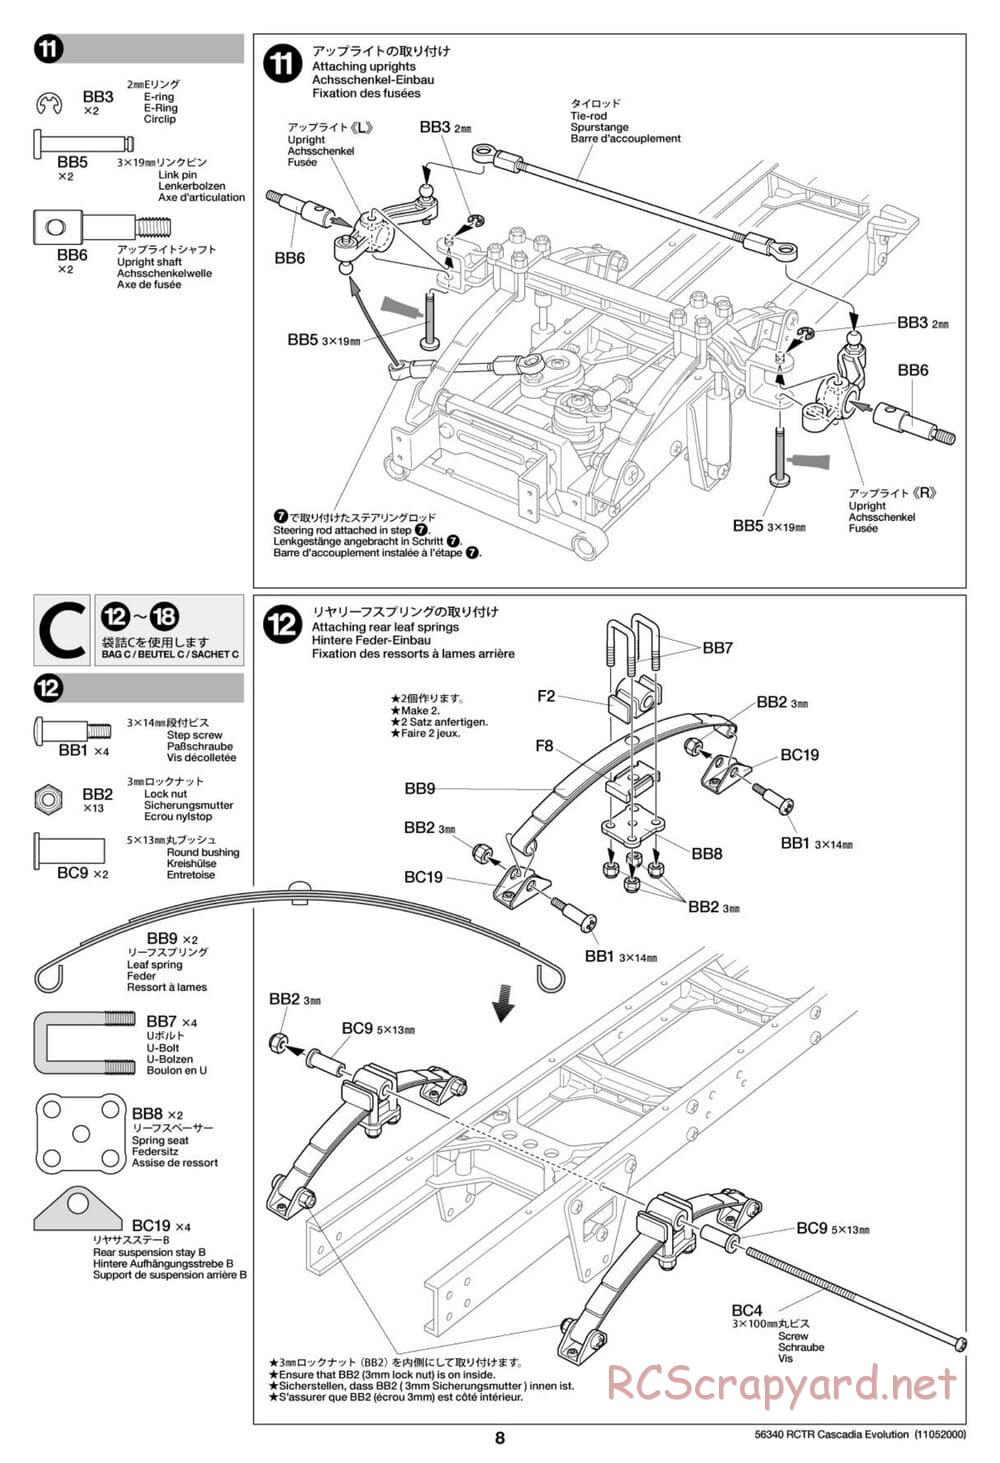 Tamiya - Freightliner Cascadia Evolution Tractor Truck Chassis - Manual - Page 8